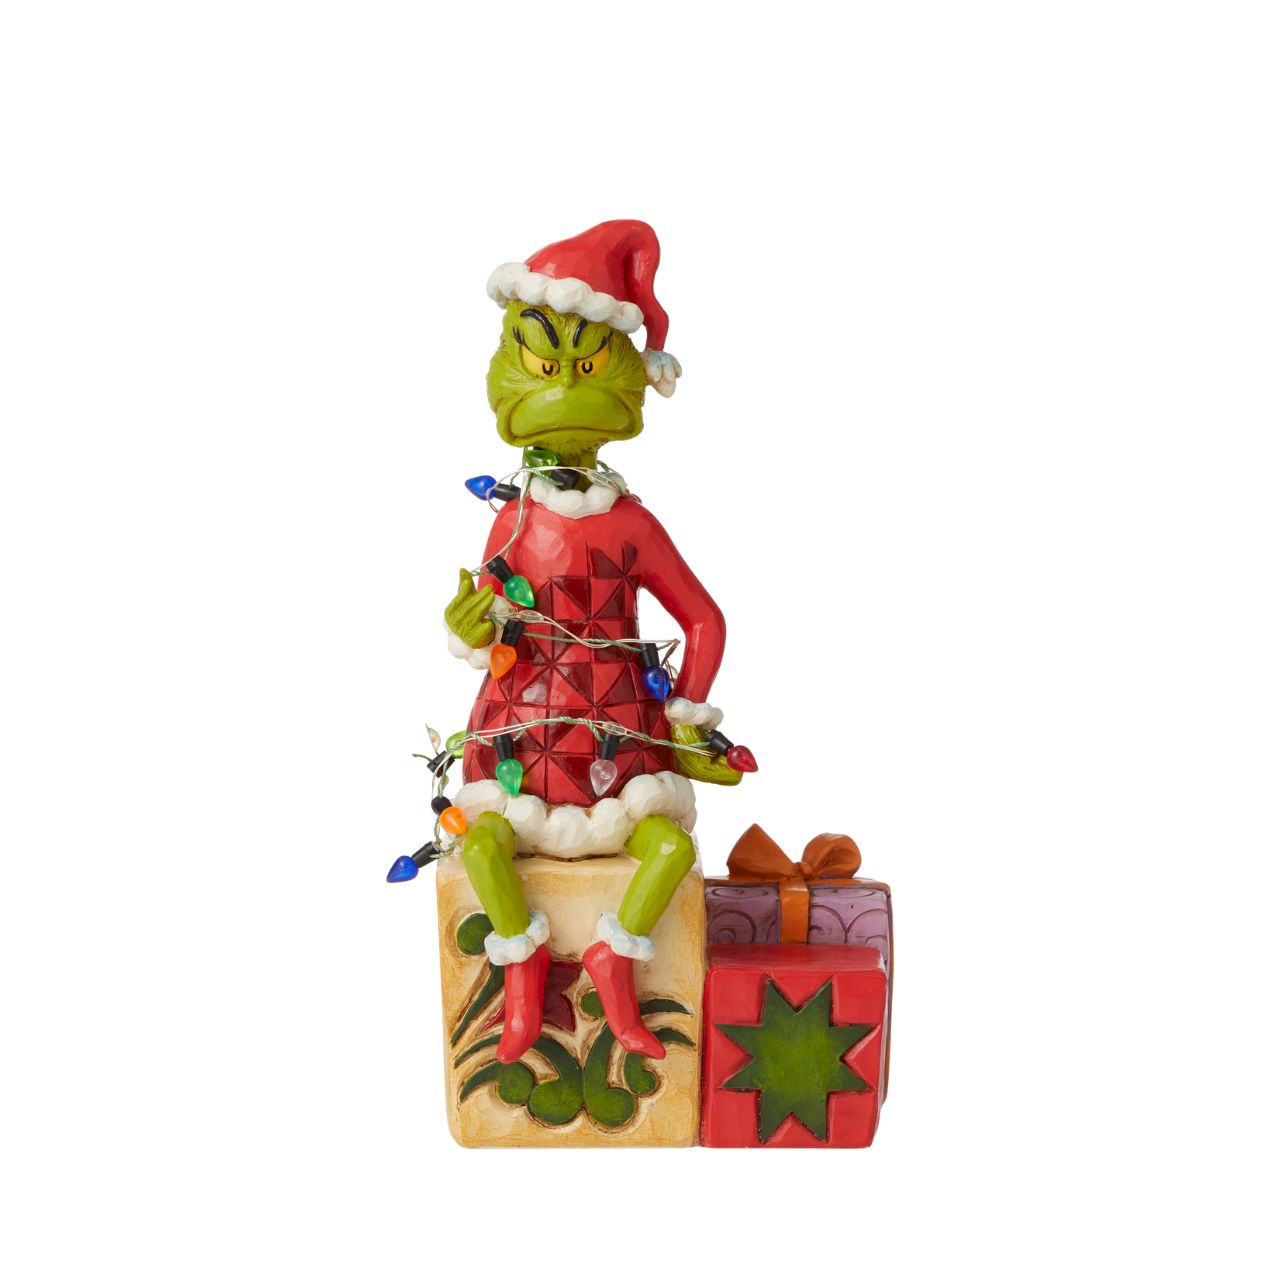 Grinch with lights Figurine - The Grinch  With a grimace on his green grouchy face, the Grinch, by Jim Shore, finds himself wrapped in a glowing string of lights as he tries to ruin the holiday. Sitting on a present, the Grinch gathers himself before he continues stealing Whoville gifts.